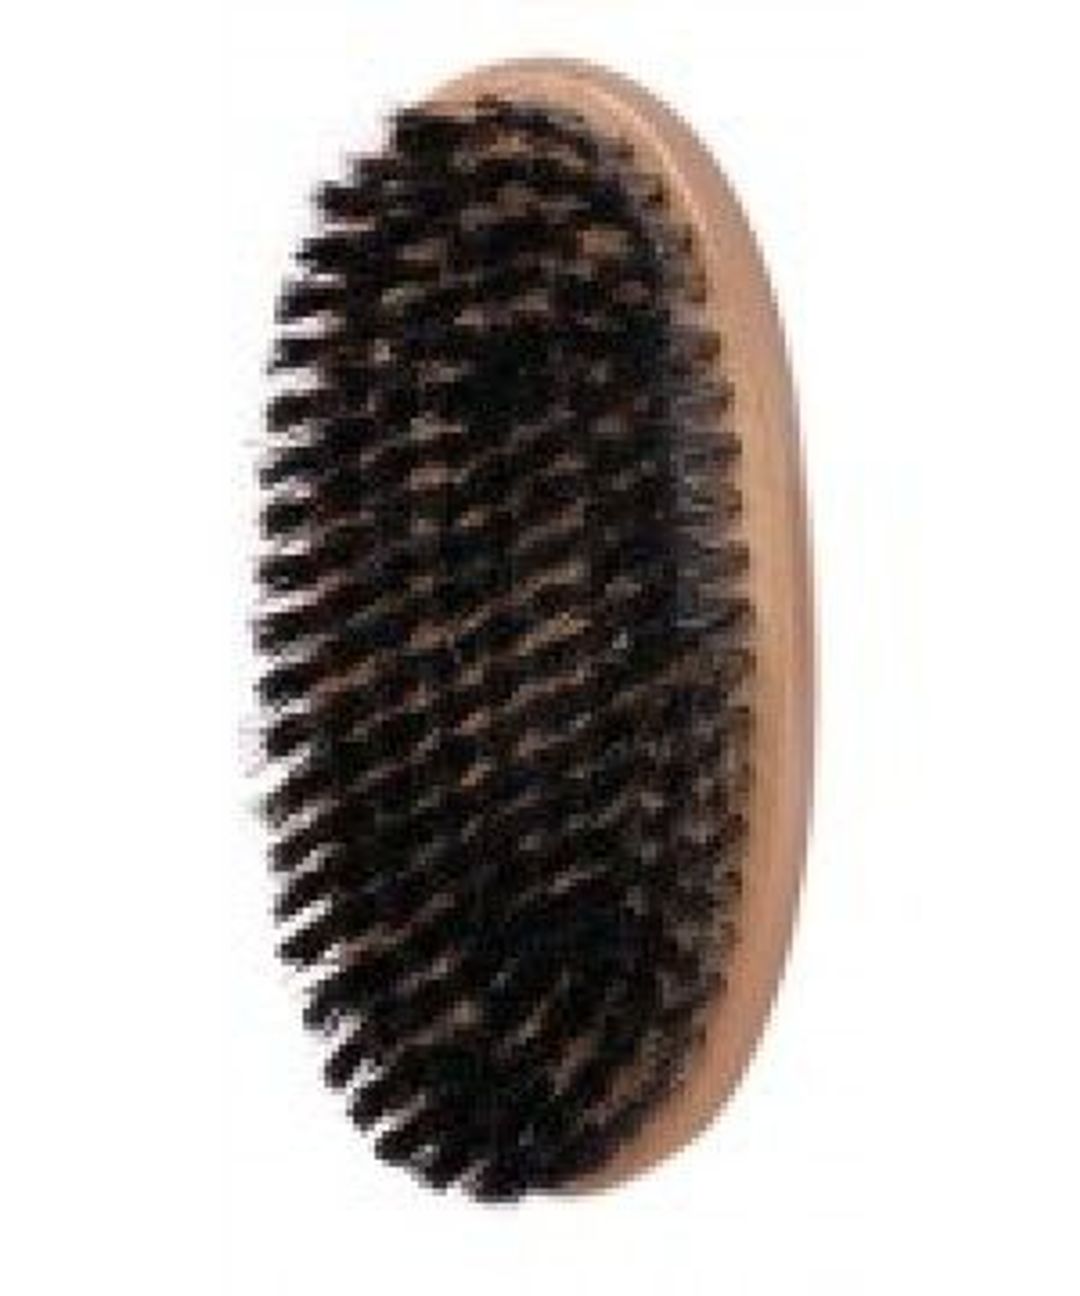 Magic Collection Soft Military Palm Brush - 7723